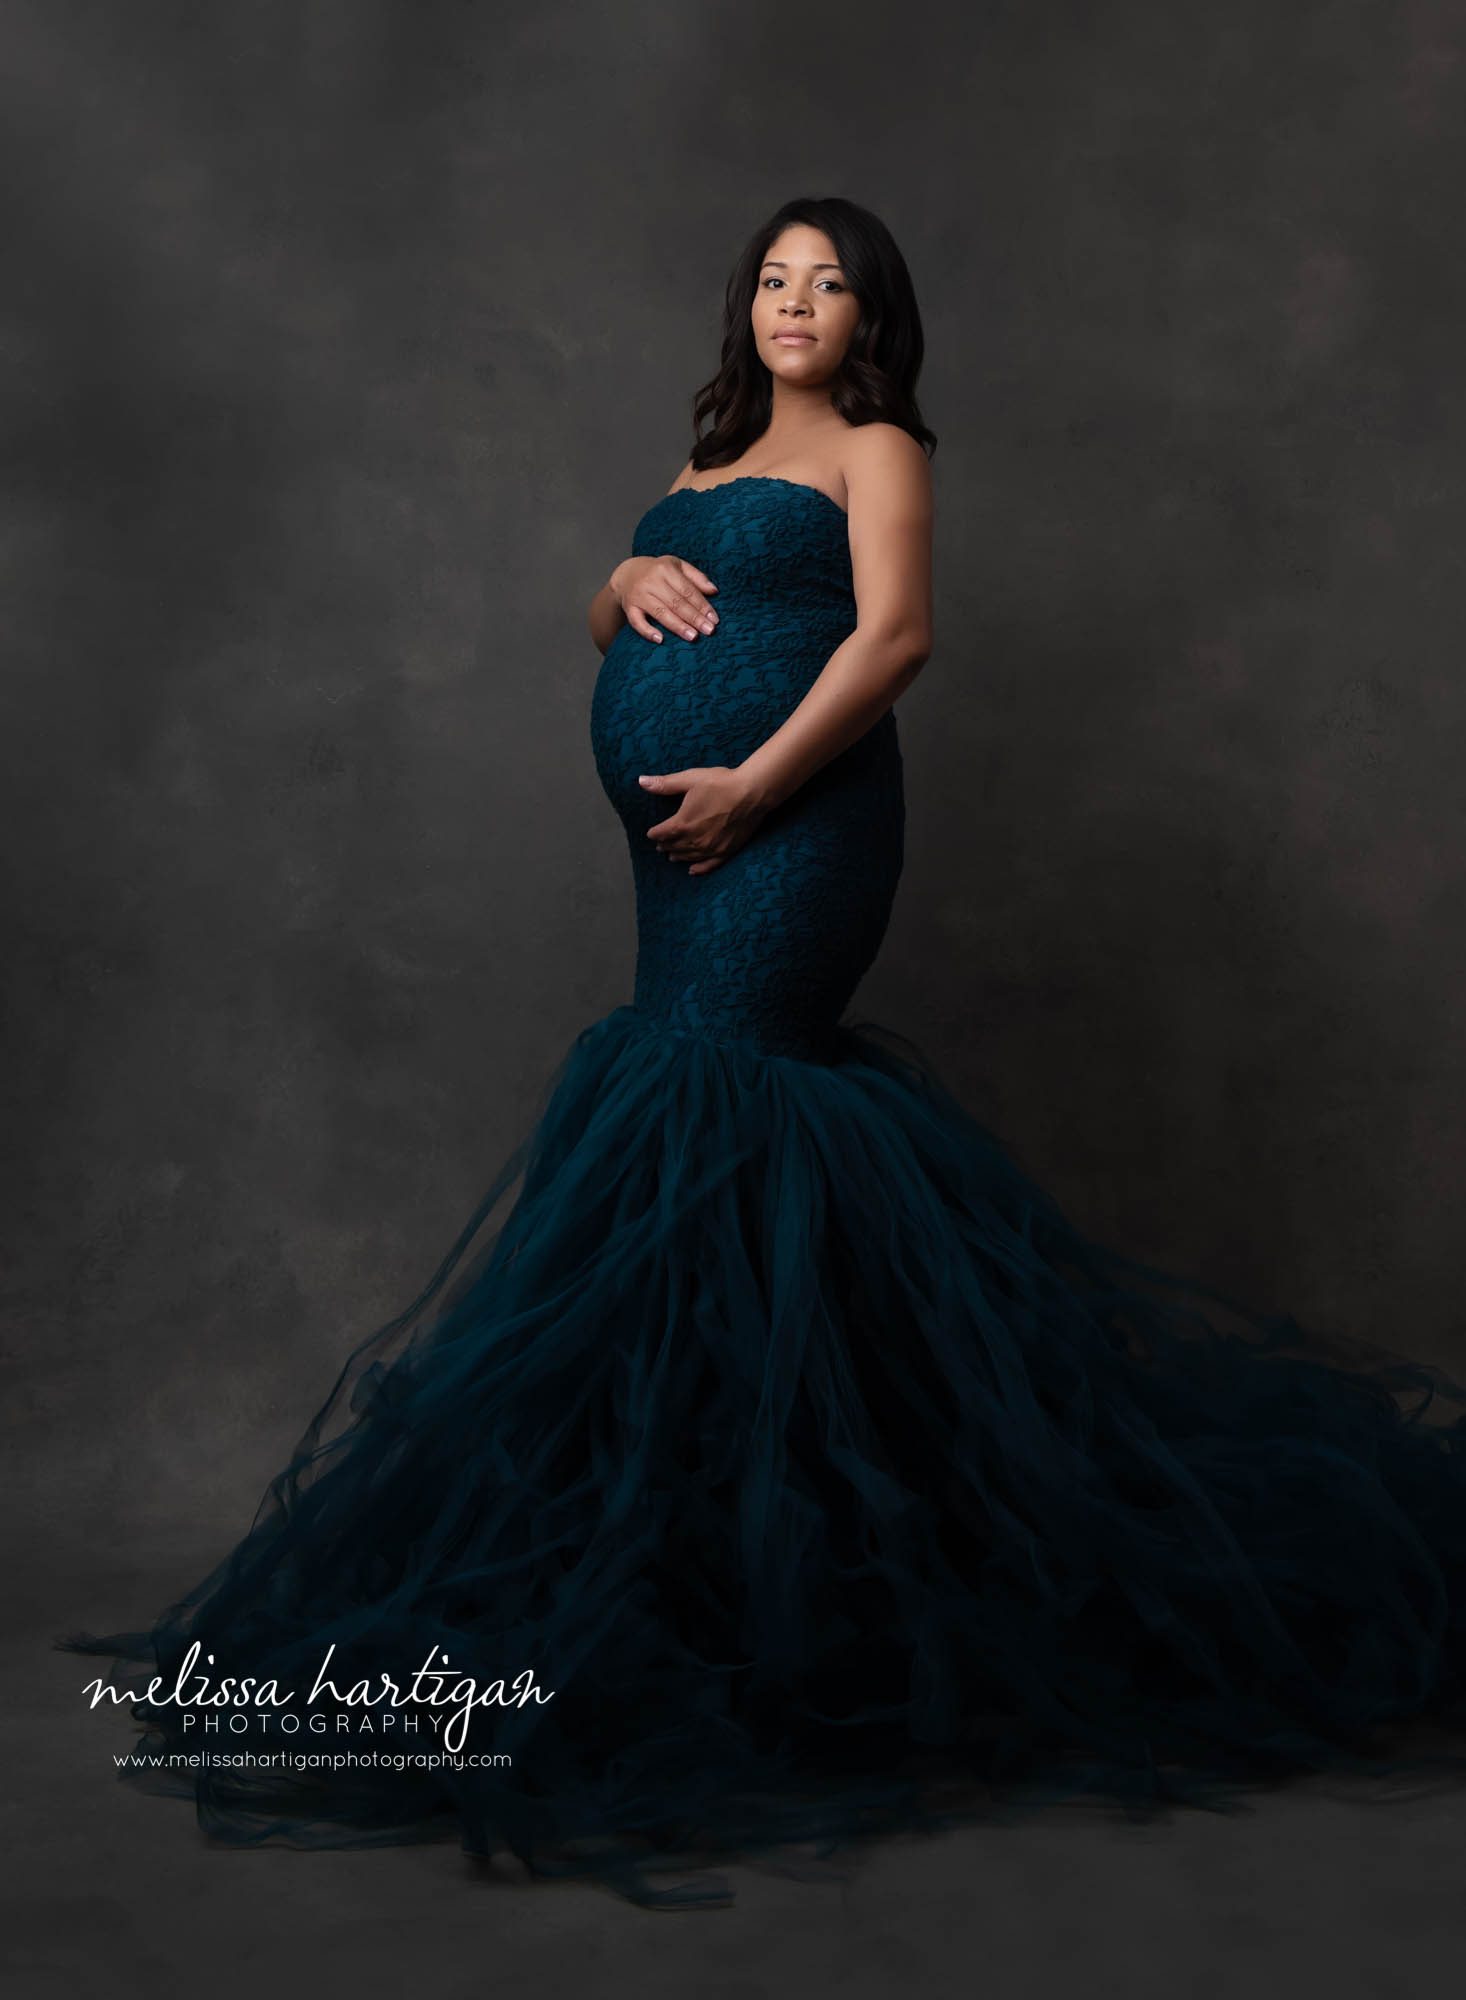 Expectant mom standing in photography studio during maternity session mom wearing teal colored slim fitting mermaid style maternity gown with lace overlay and tulle bottom skirt